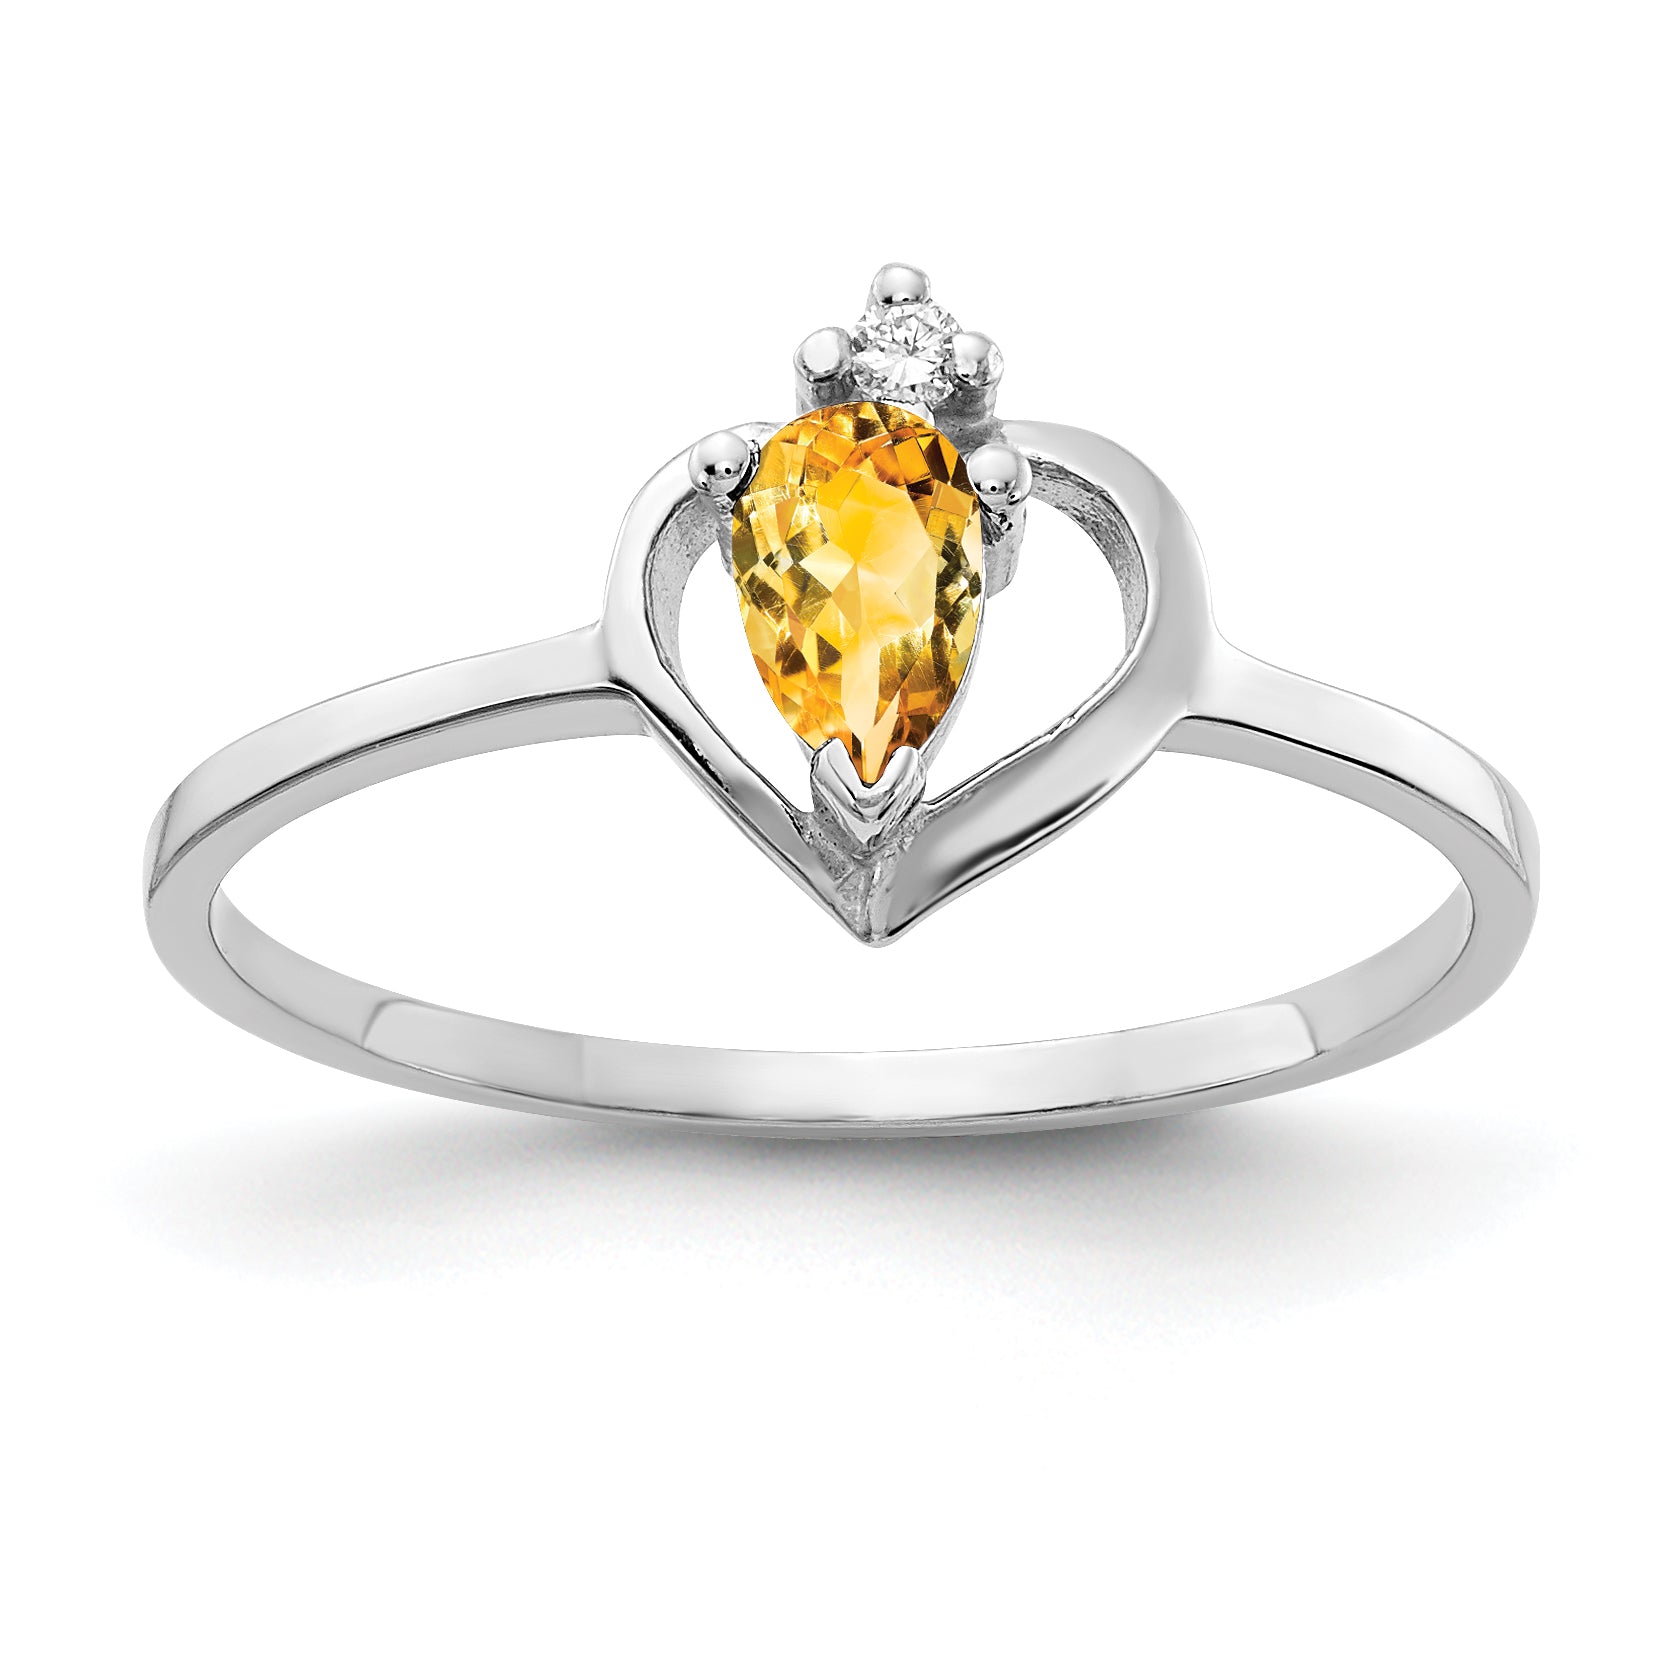 Image of ID 1 14k White Gold 5x3mm Pear Citrine A4 Diamond ring